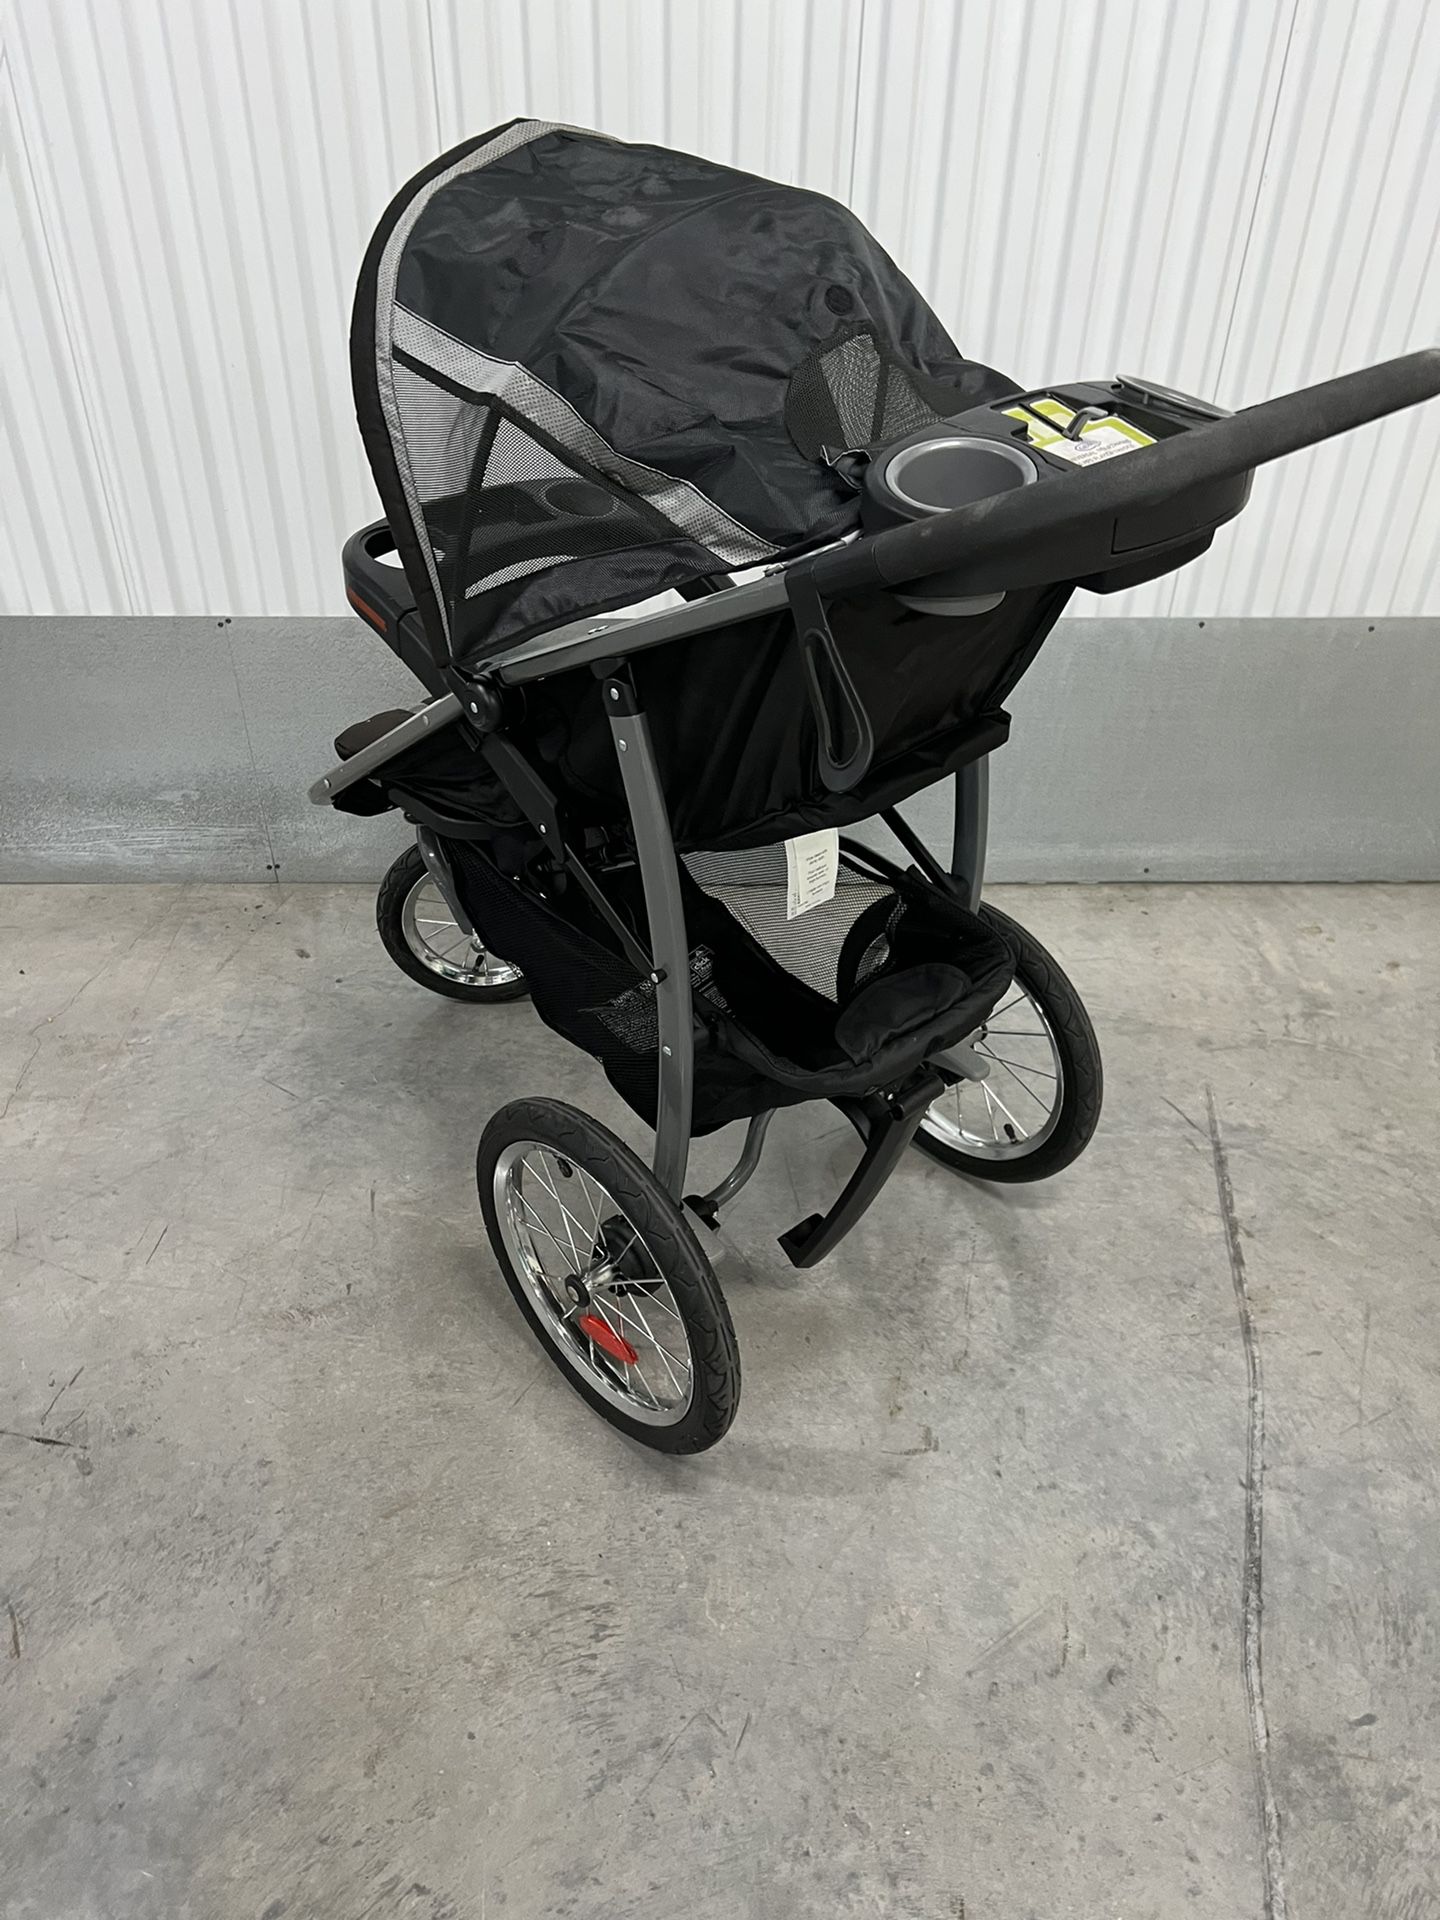 Graco Fast Action Fold Jogger Click Connect Travel System Stroller black and gray good condition simply needs a detail wipe down  other than that it’s